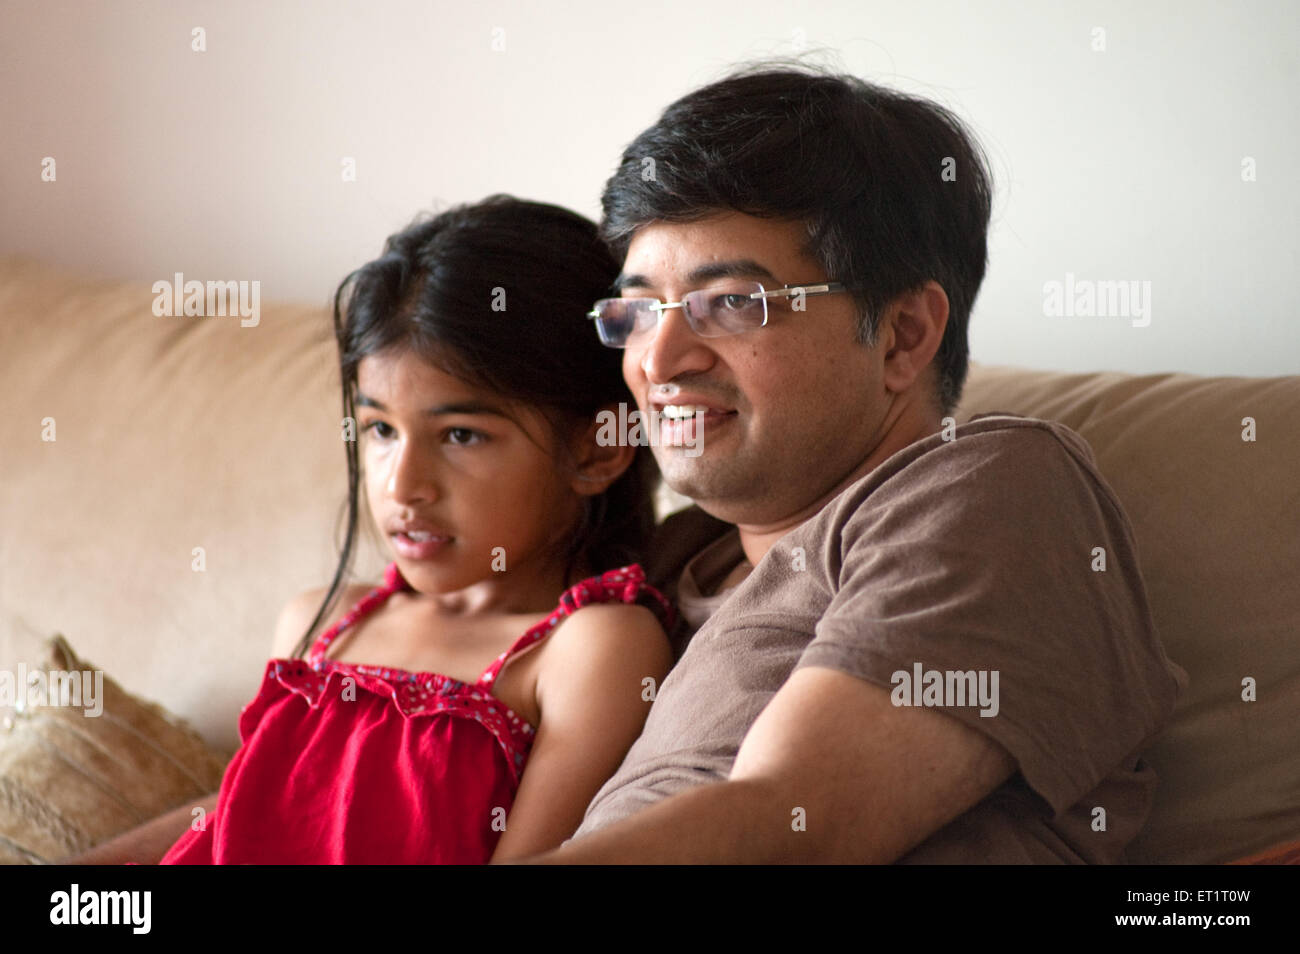 Father with daughter man and girl child MR#556 Stock Photo